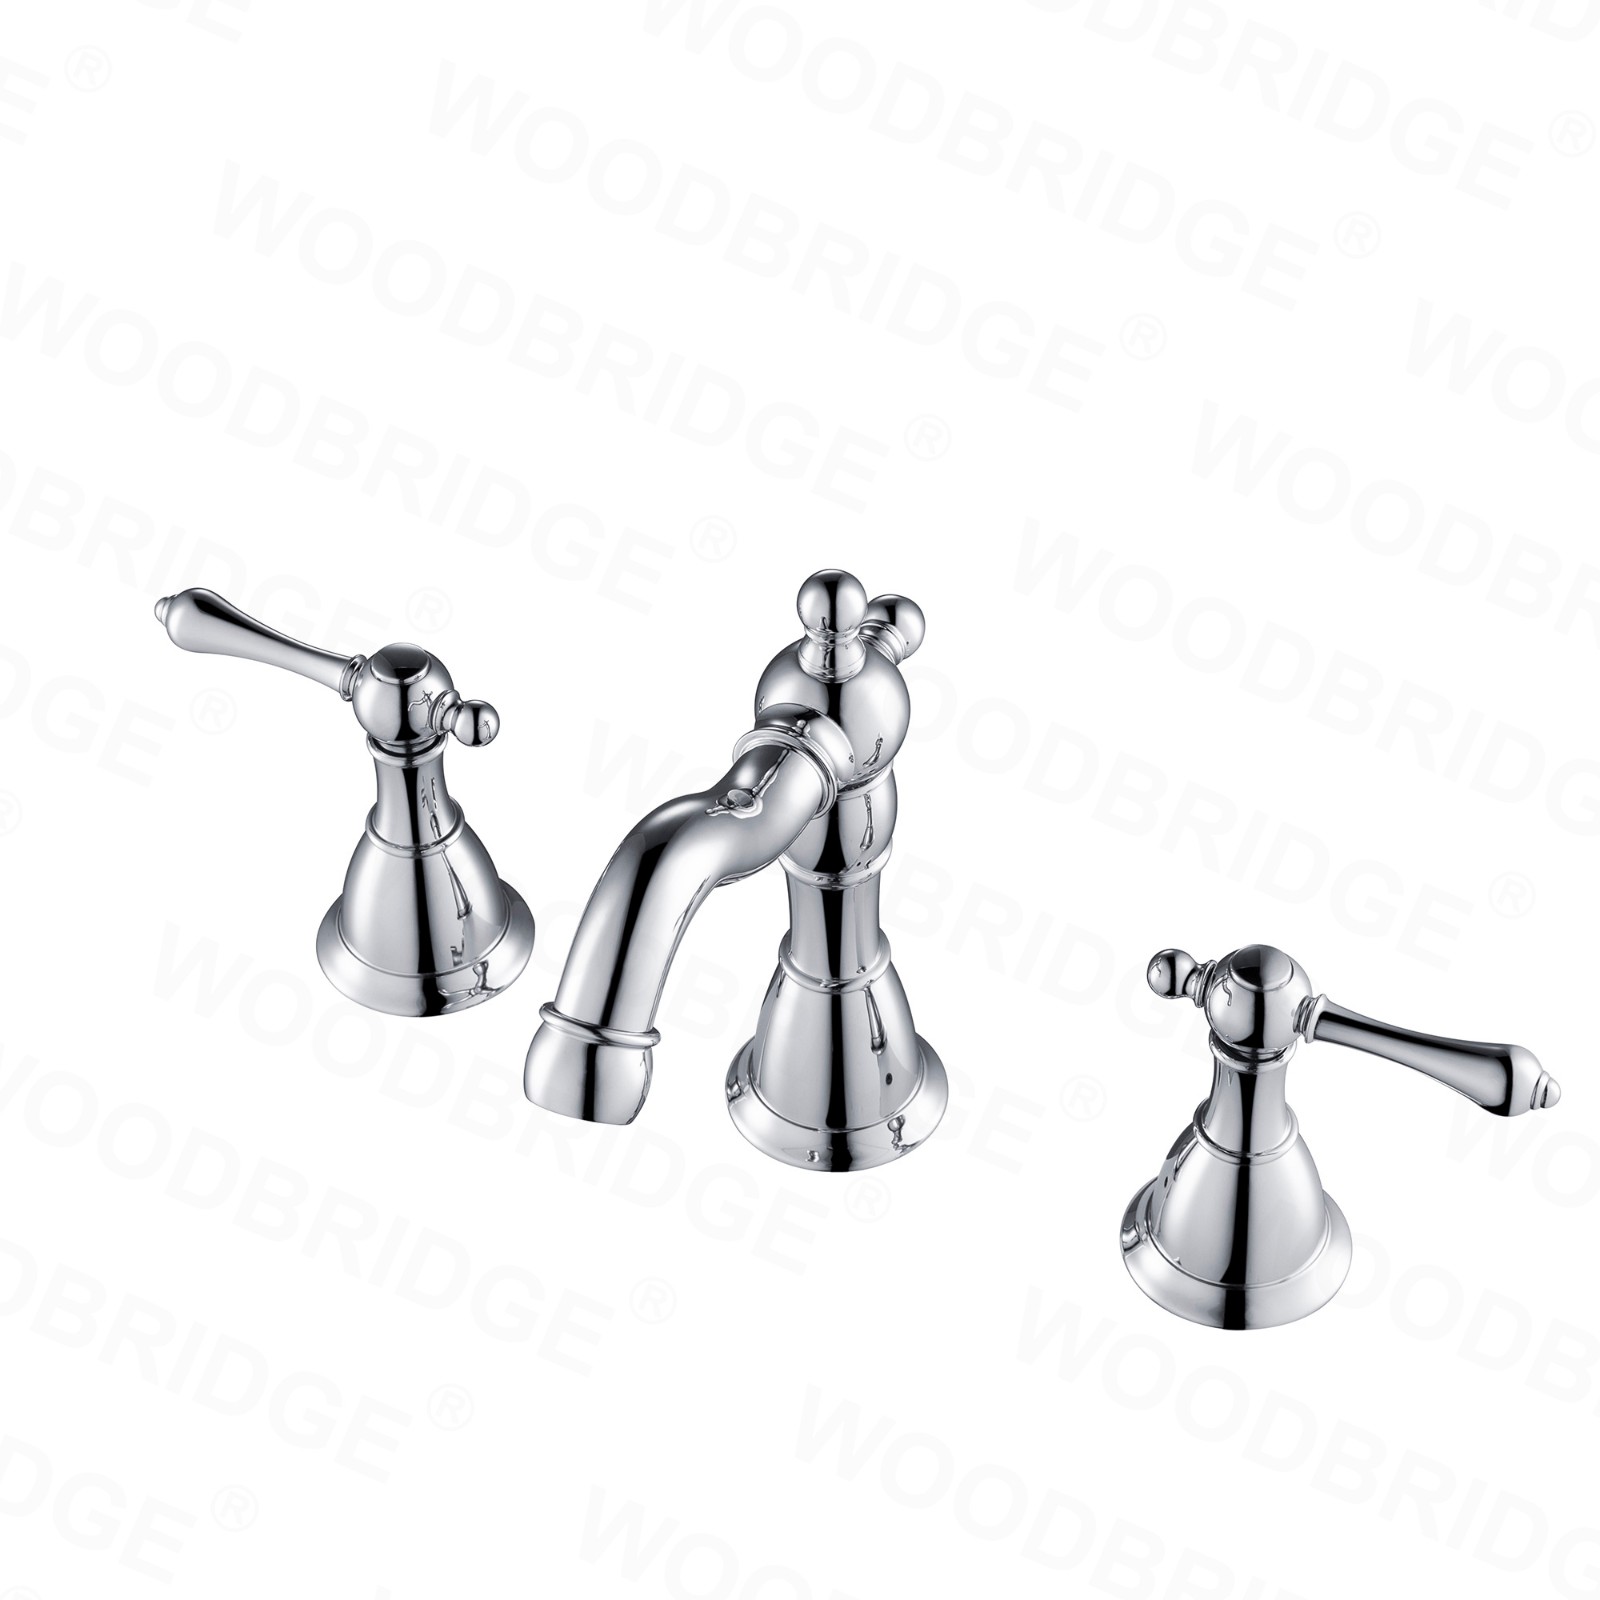  WOODBRIDGE WB802005CH 8-inch 3-hole Widespread Lavatory Faucet with Two Metal Lever Handle, Chrome_6327